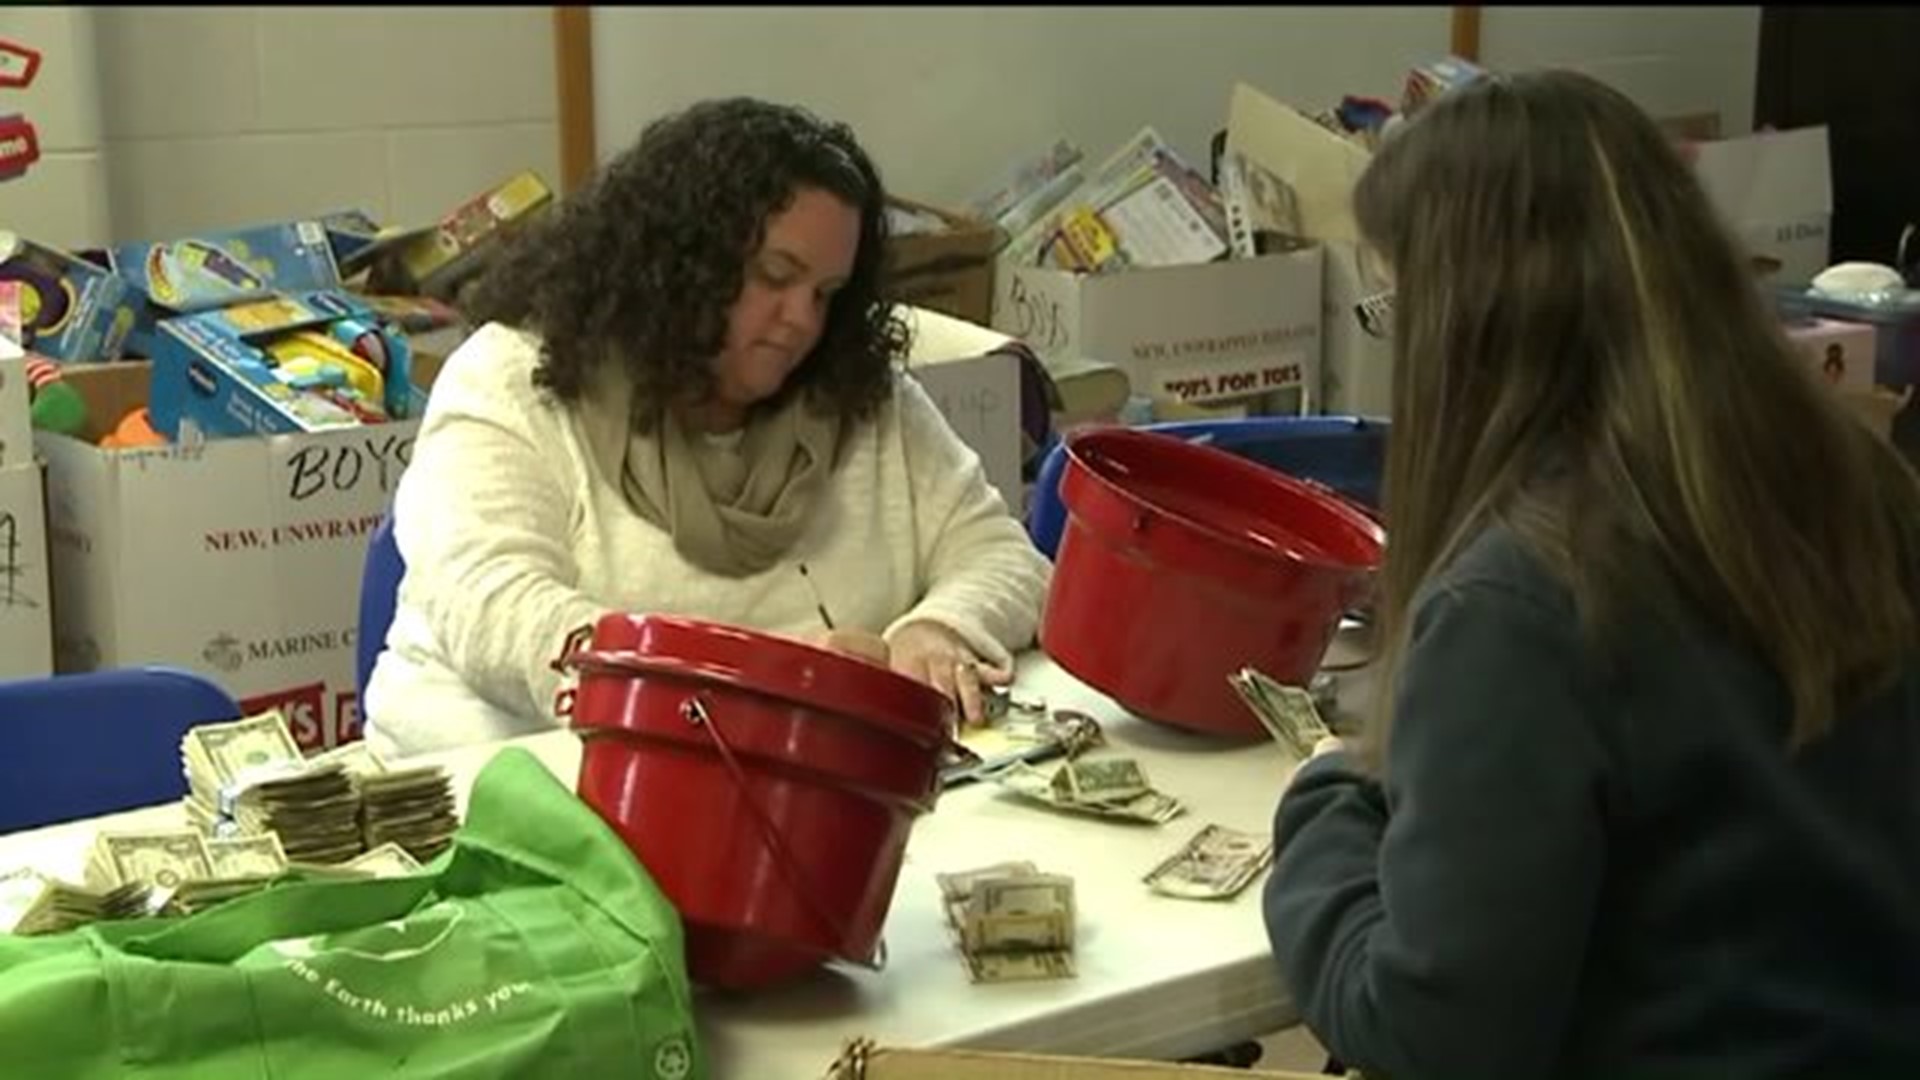 Clinton County Salvation Army Down in Donations